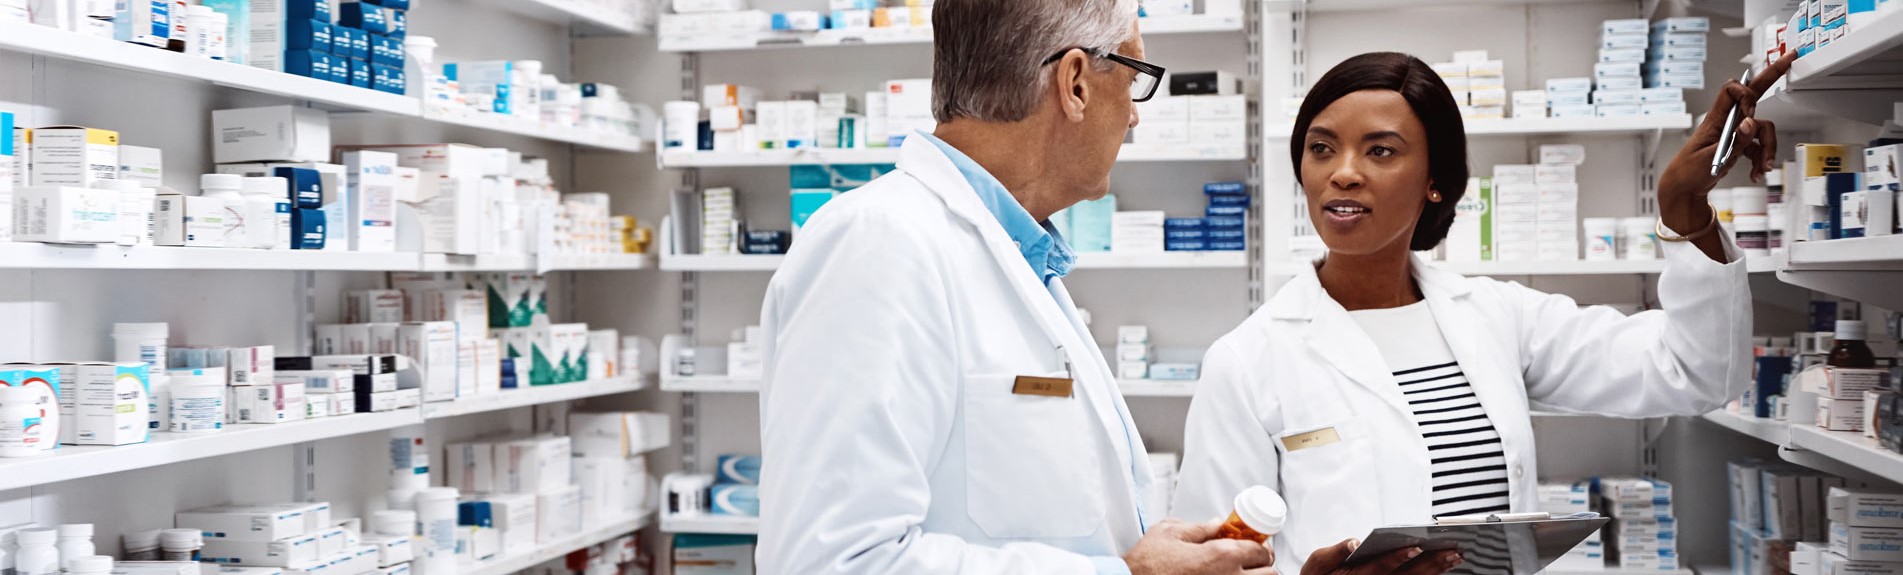 Two Pharmacists Working Together In A Drugstore